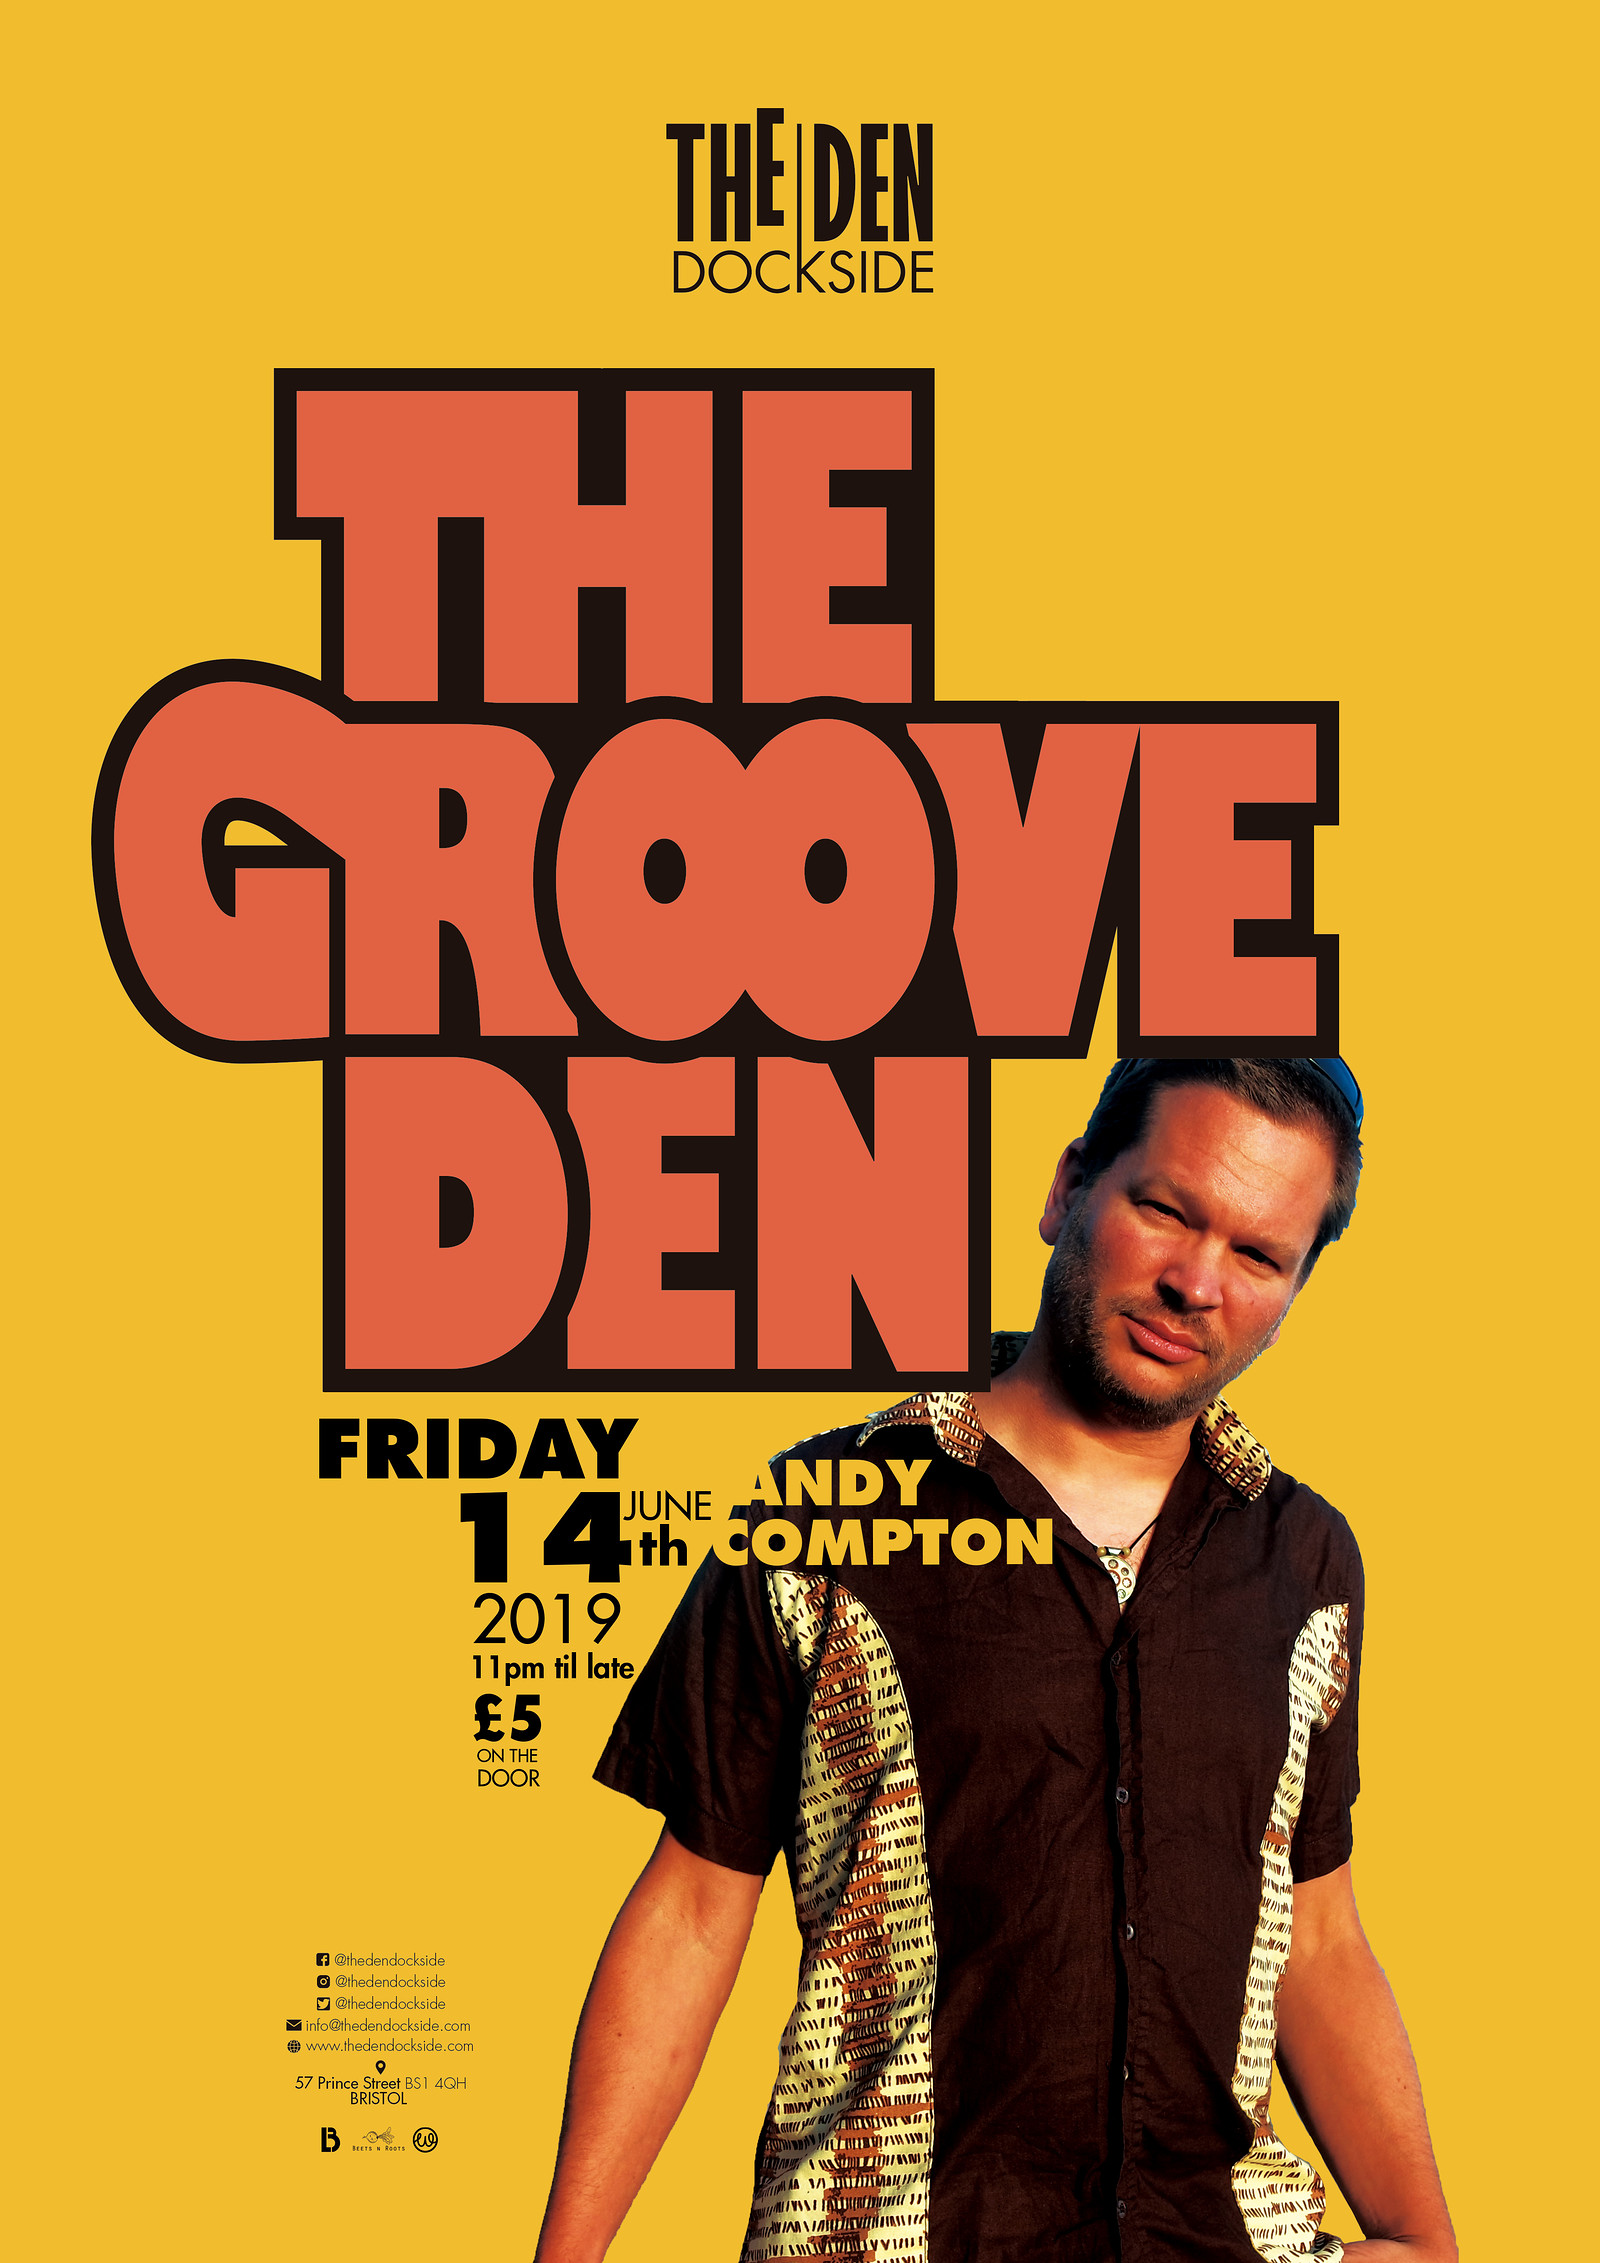 Groove Den, Featuring Andy Compton at The Den - Dockside